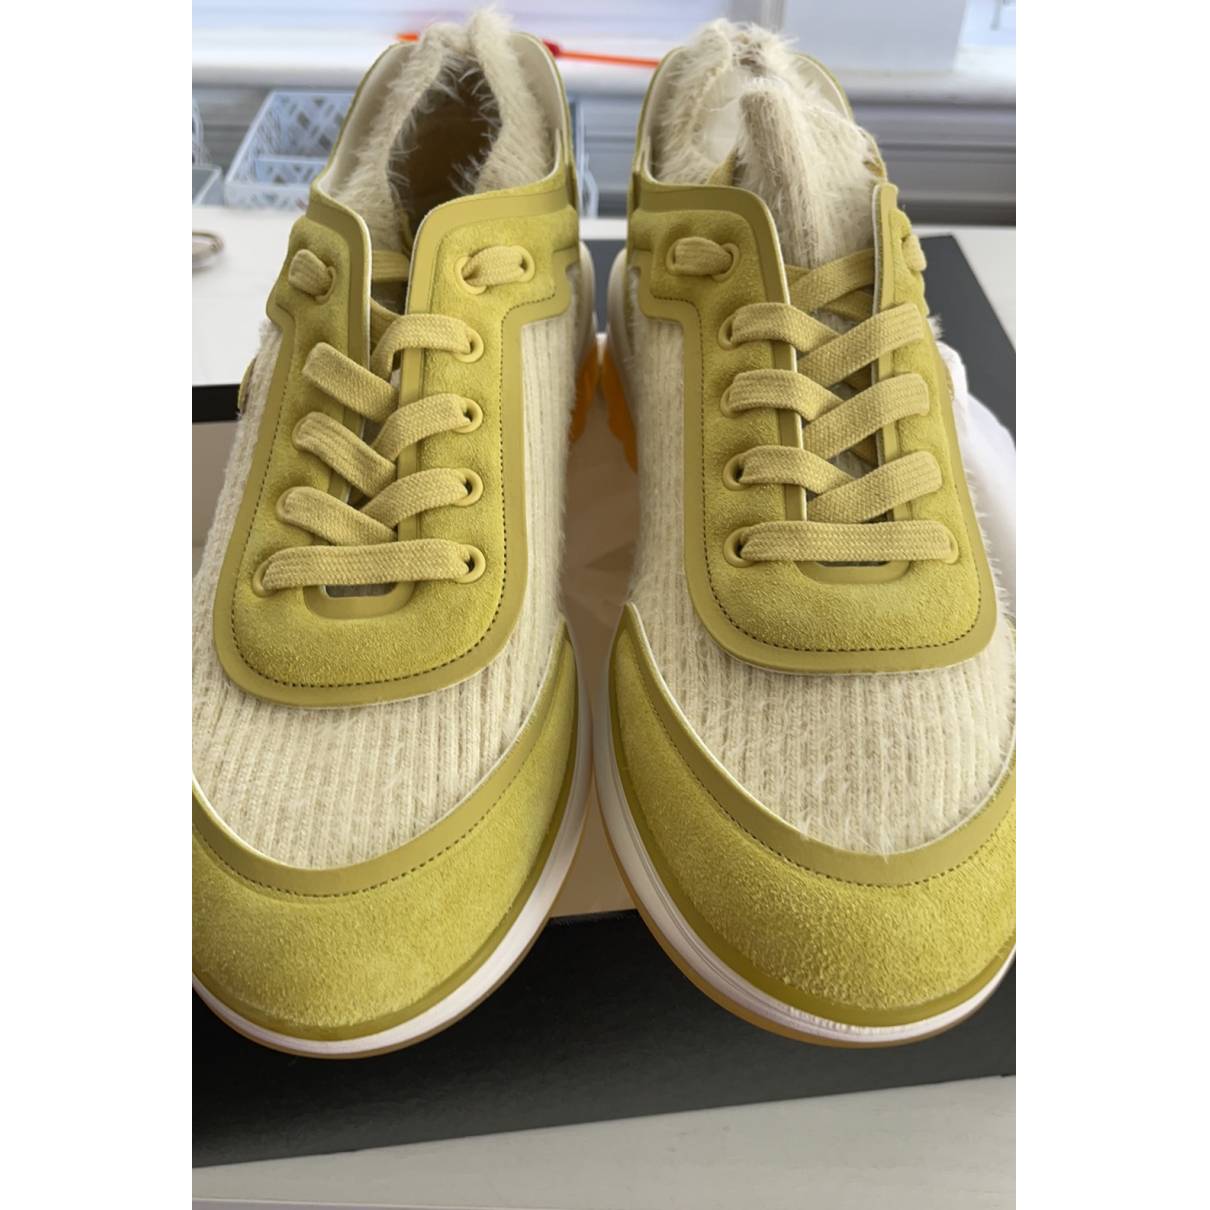 Chanel - Authenticated Trainer - Suede Yellow for Women, Never Worn, with Tag